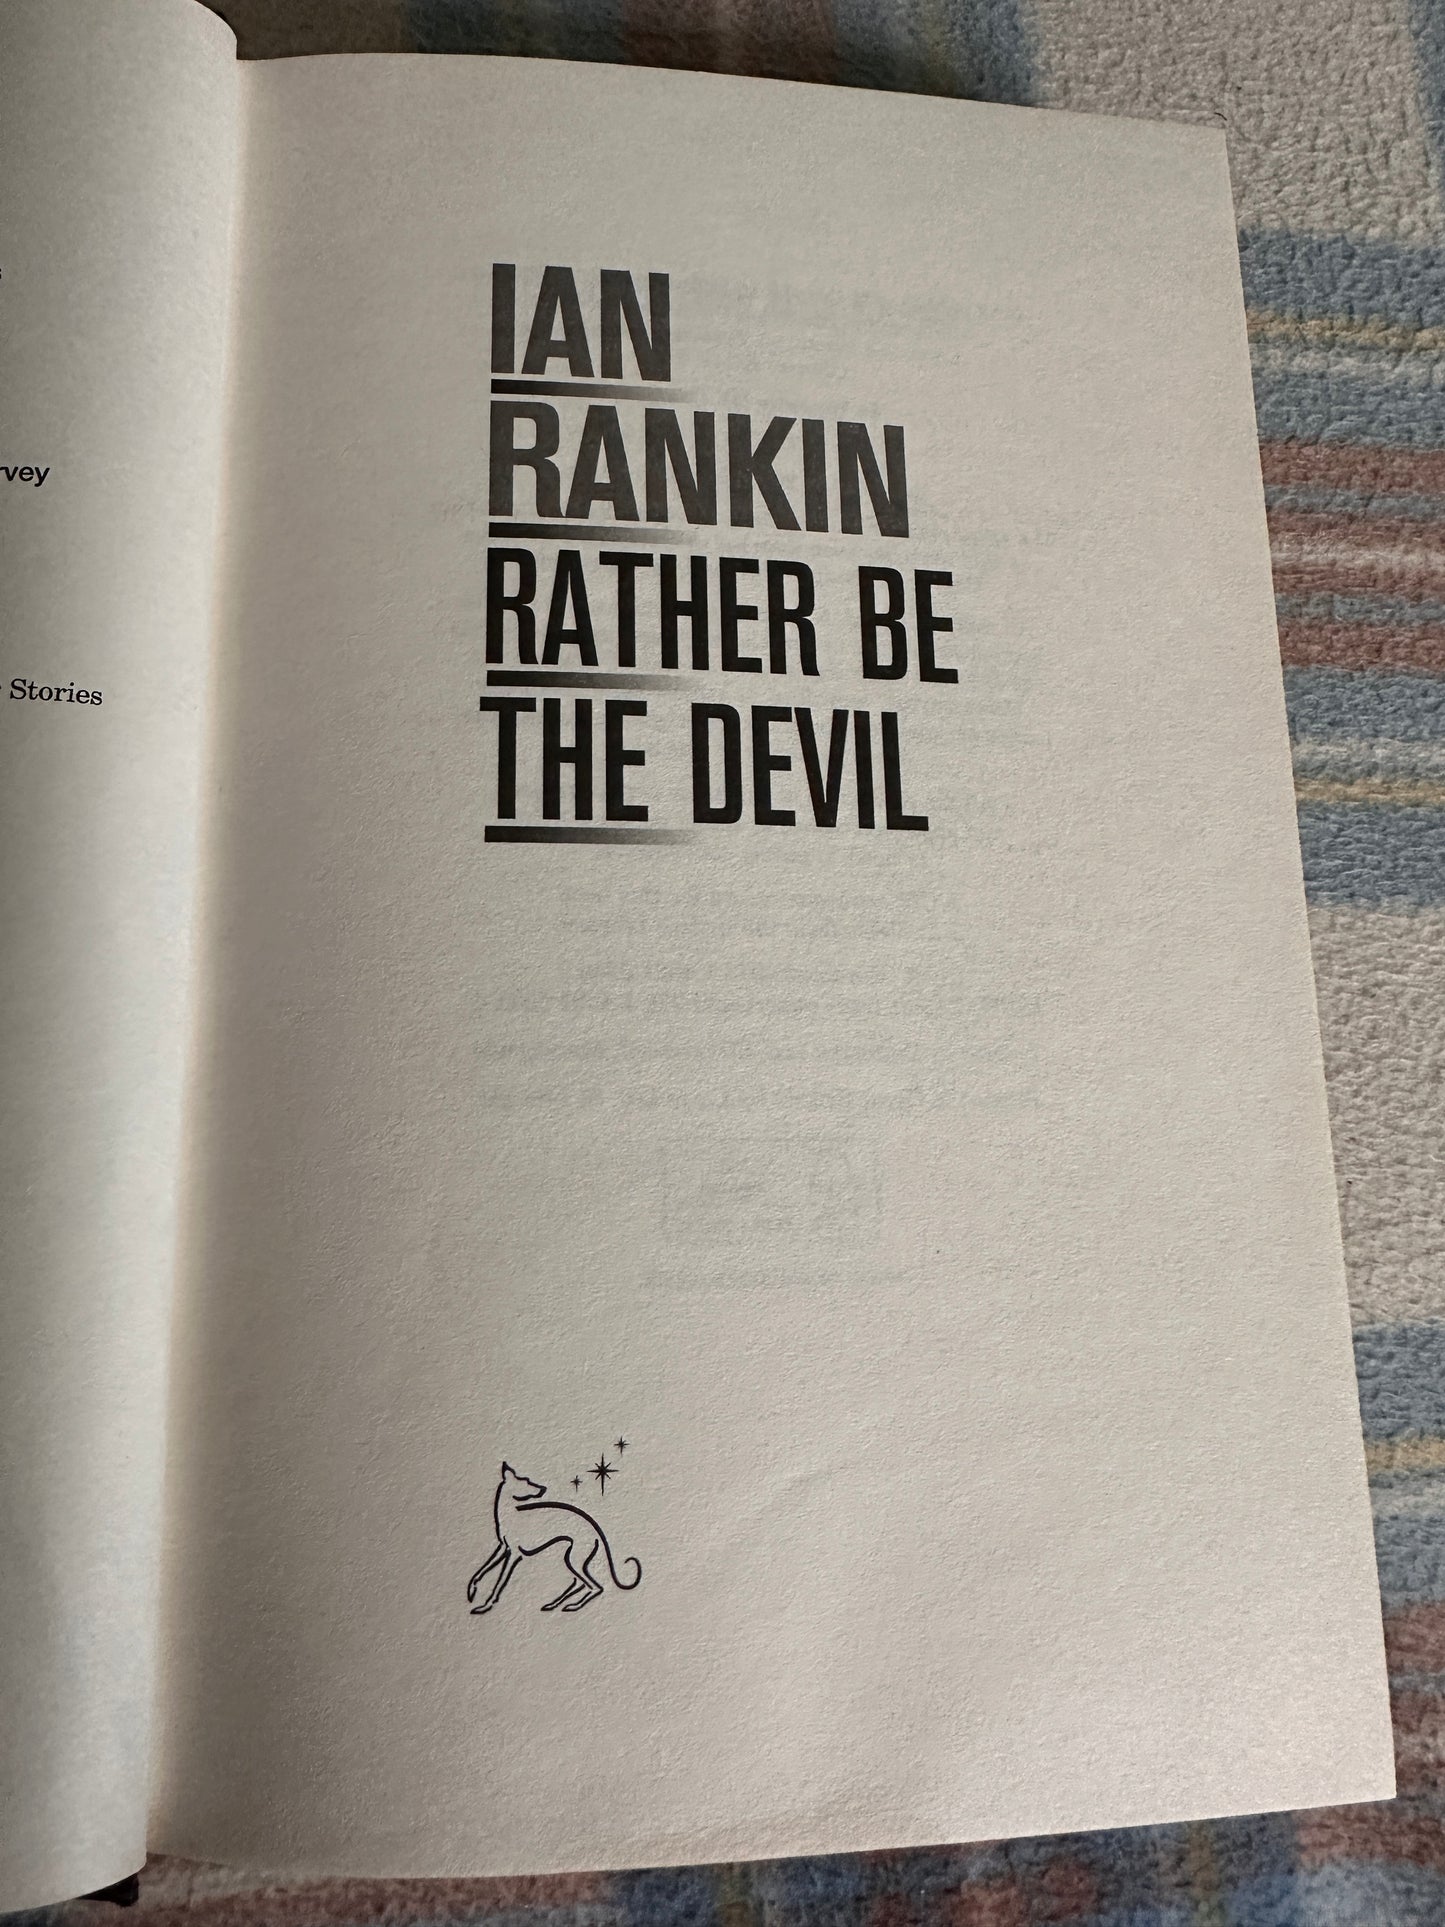 2016*1st* Rather Be The Devil - Ian Rankin(Orion)